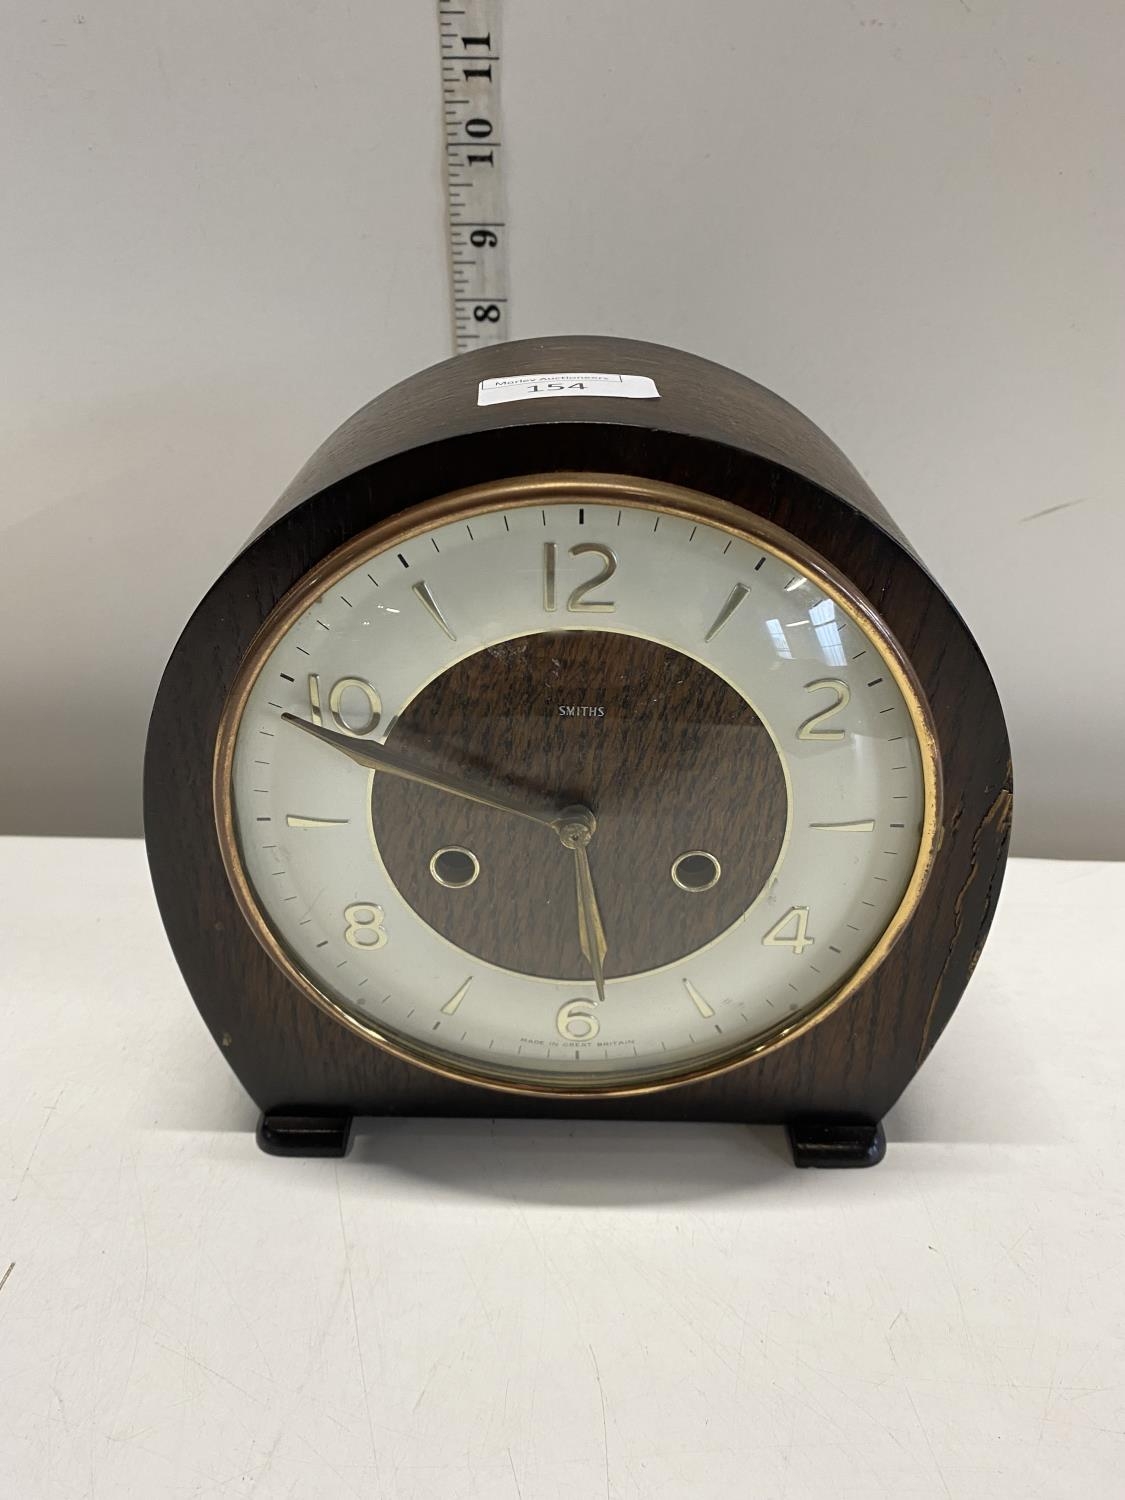 A wooden cased Smiths mantle clock with key and pendulum, shipping unavailable